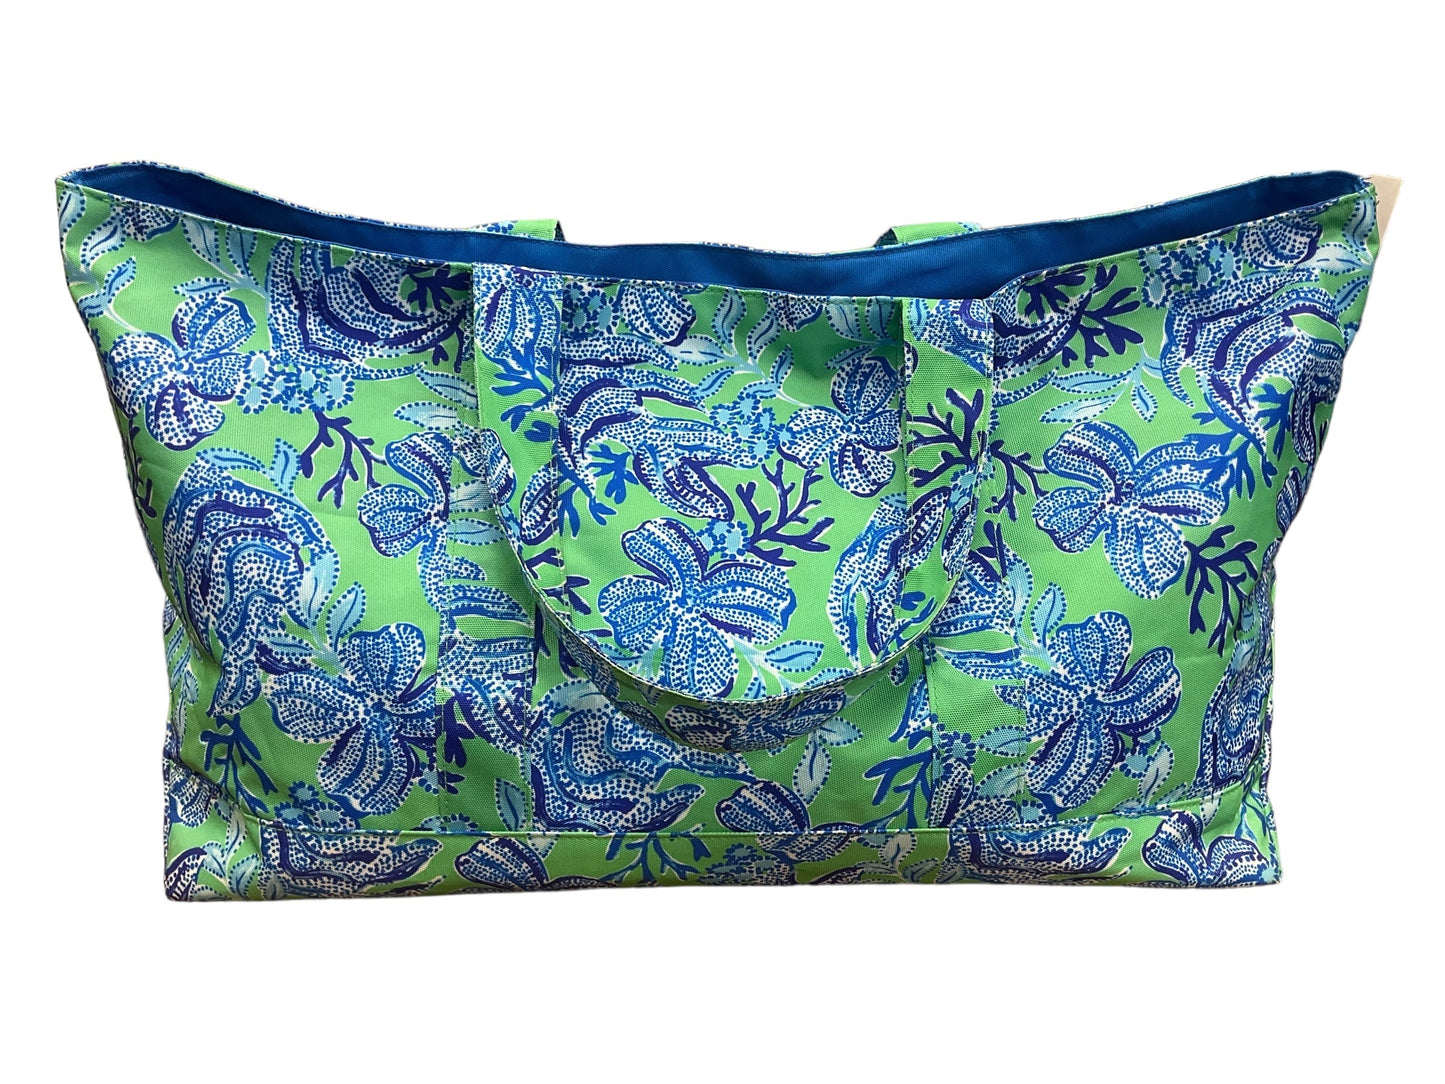 Tote Lilly Pulitzer, Size Large